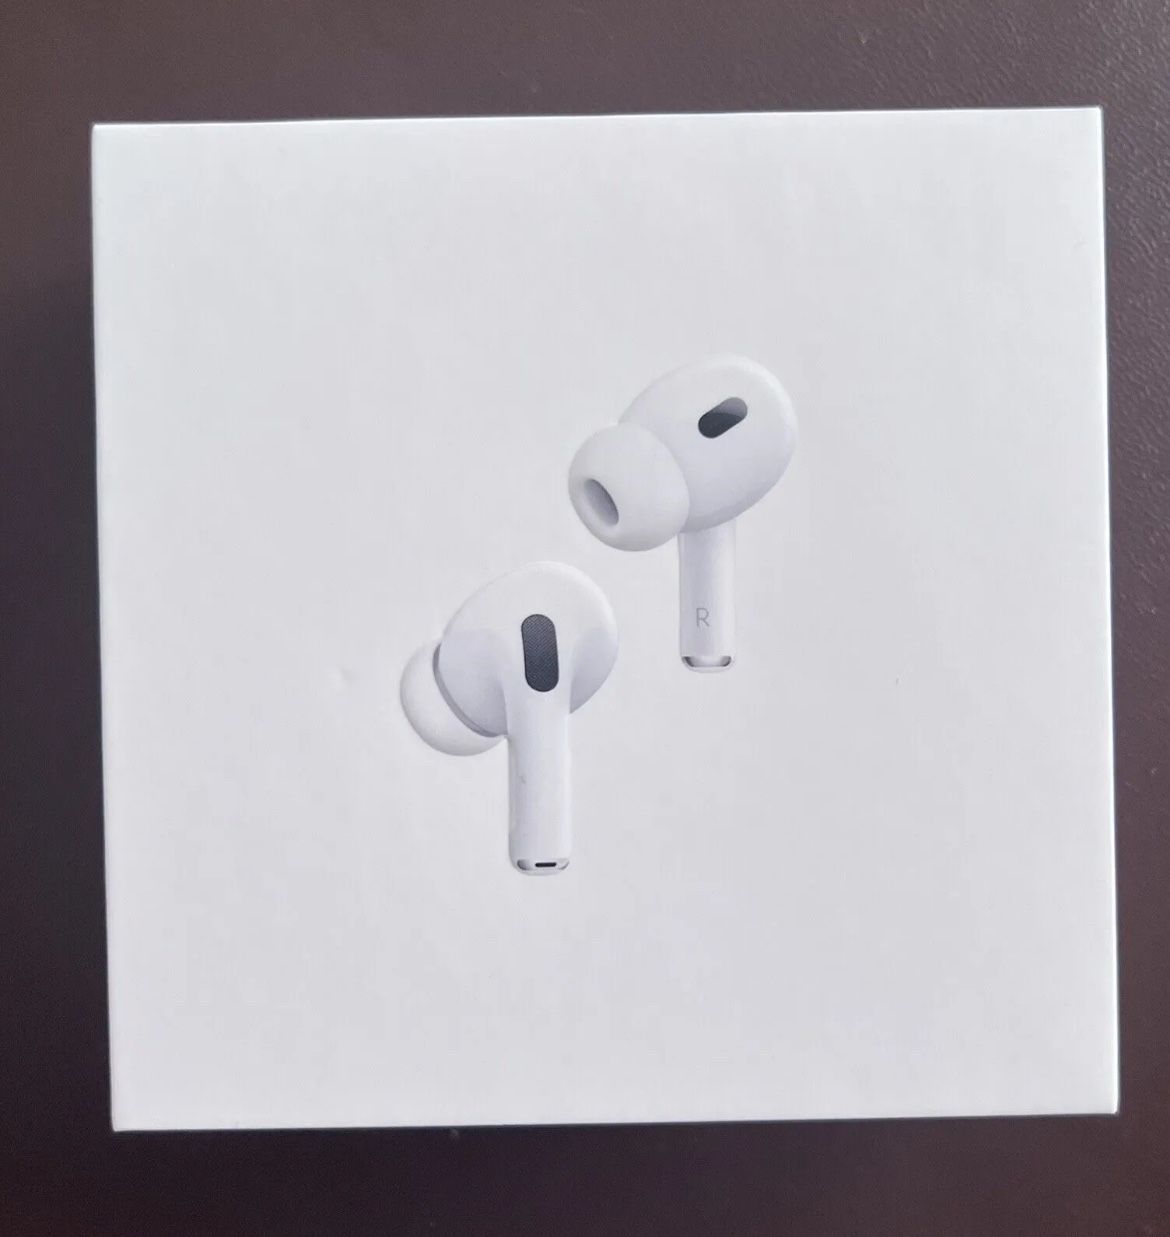   (BEST OFFERS)Apple AirPods Pro Gen2 with Wireless Charging Case - White  